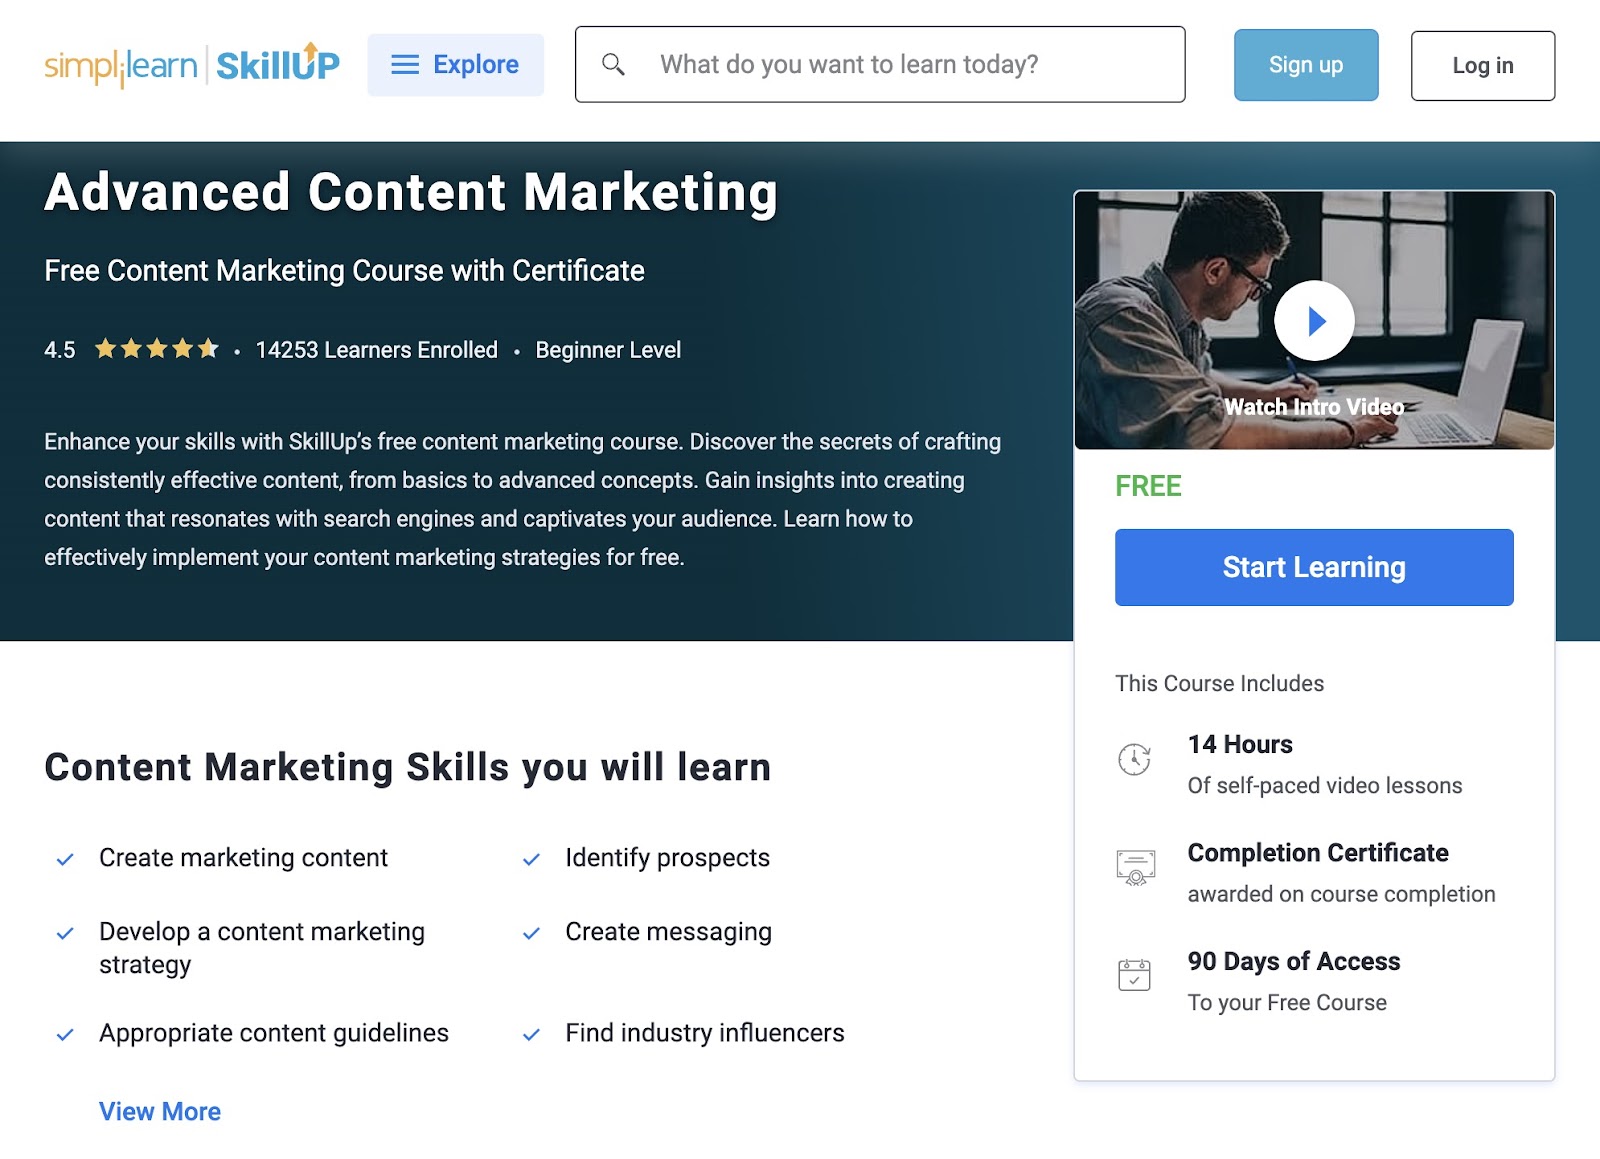 Advanced Content Marketing course page